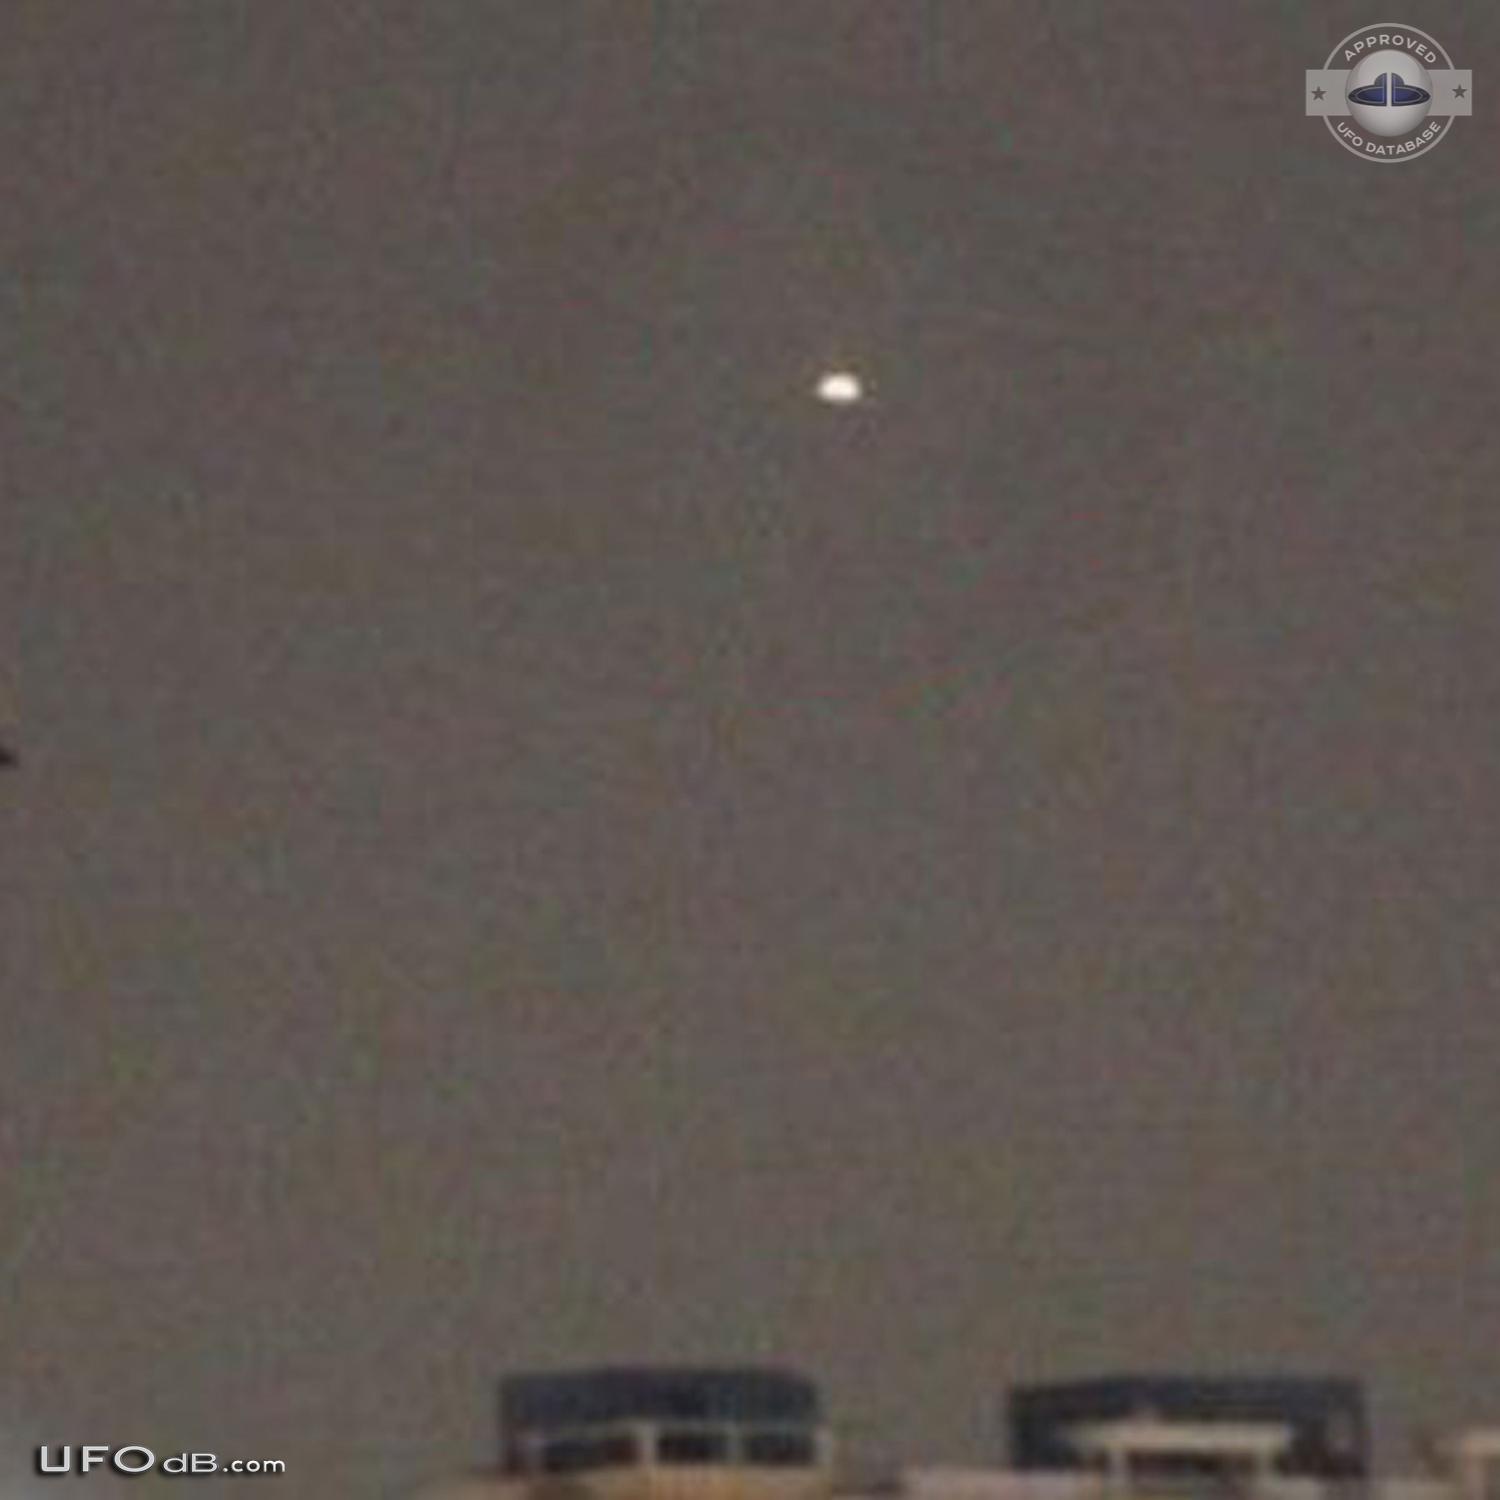 China Newspaper say [The Aliens are coming] after UFO sightings 2010 UFO Picture #469-2